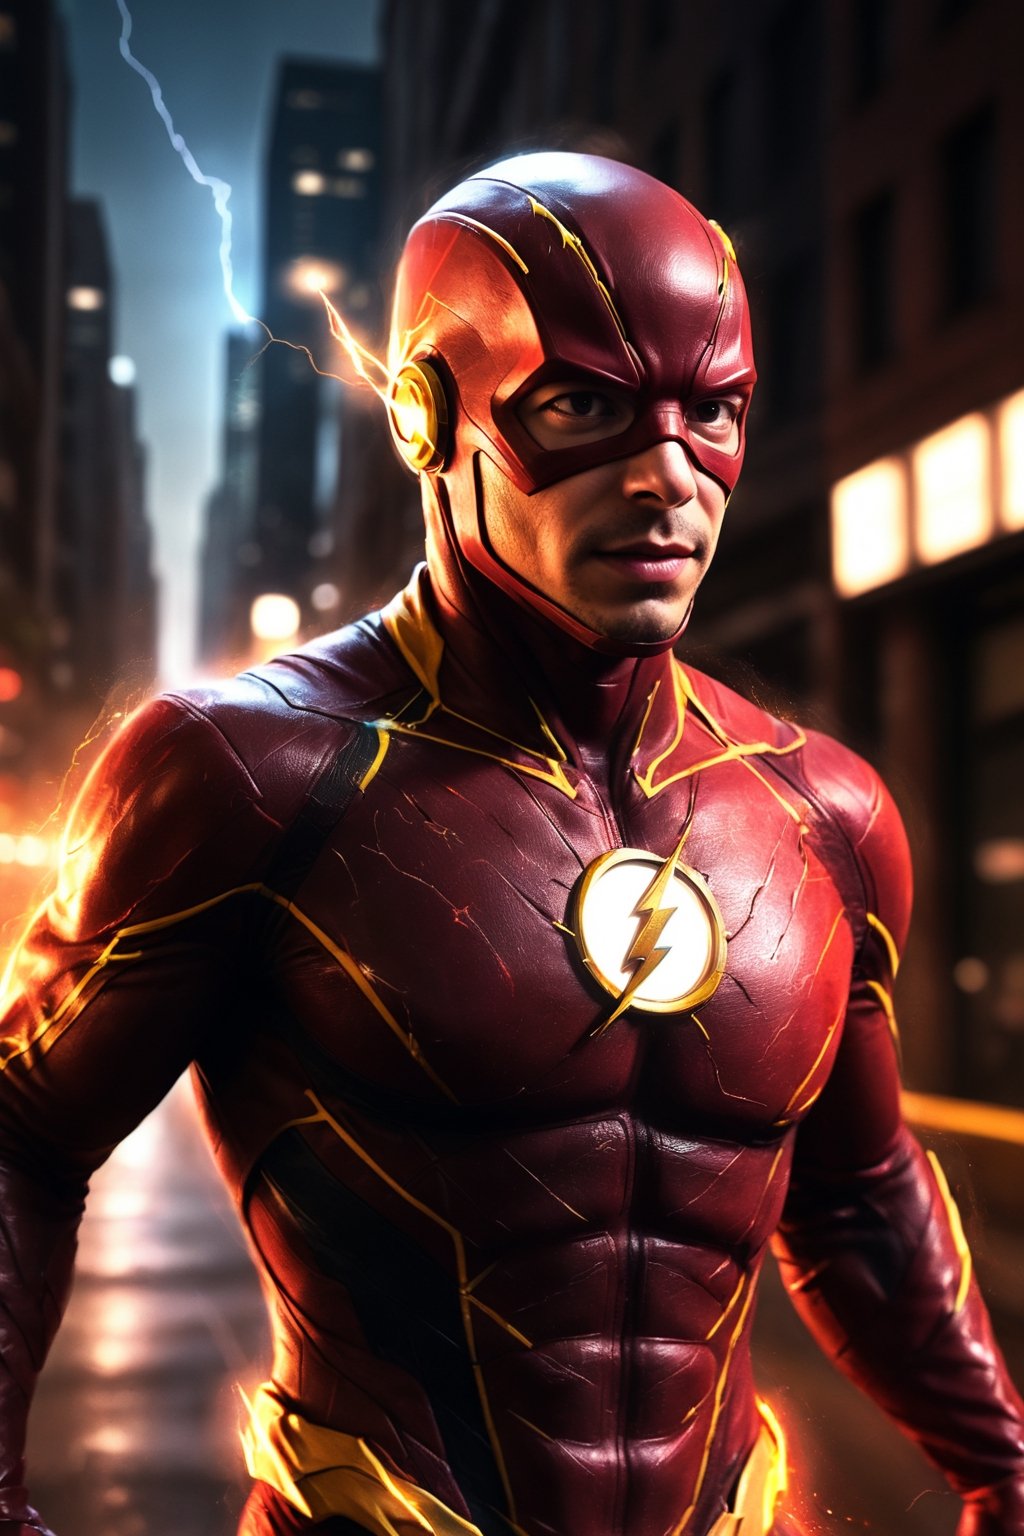 A detailed, realistic digital painting of The Flash in the style of Zack Snyder. He is running through a city street at night, the only light coming from the lightning and his glowing eyes. The Flash's suit is red and yellow, and he is wearing a lightning bolt mask. The image is post-processed with color grading, film grain, and lightning effects.

